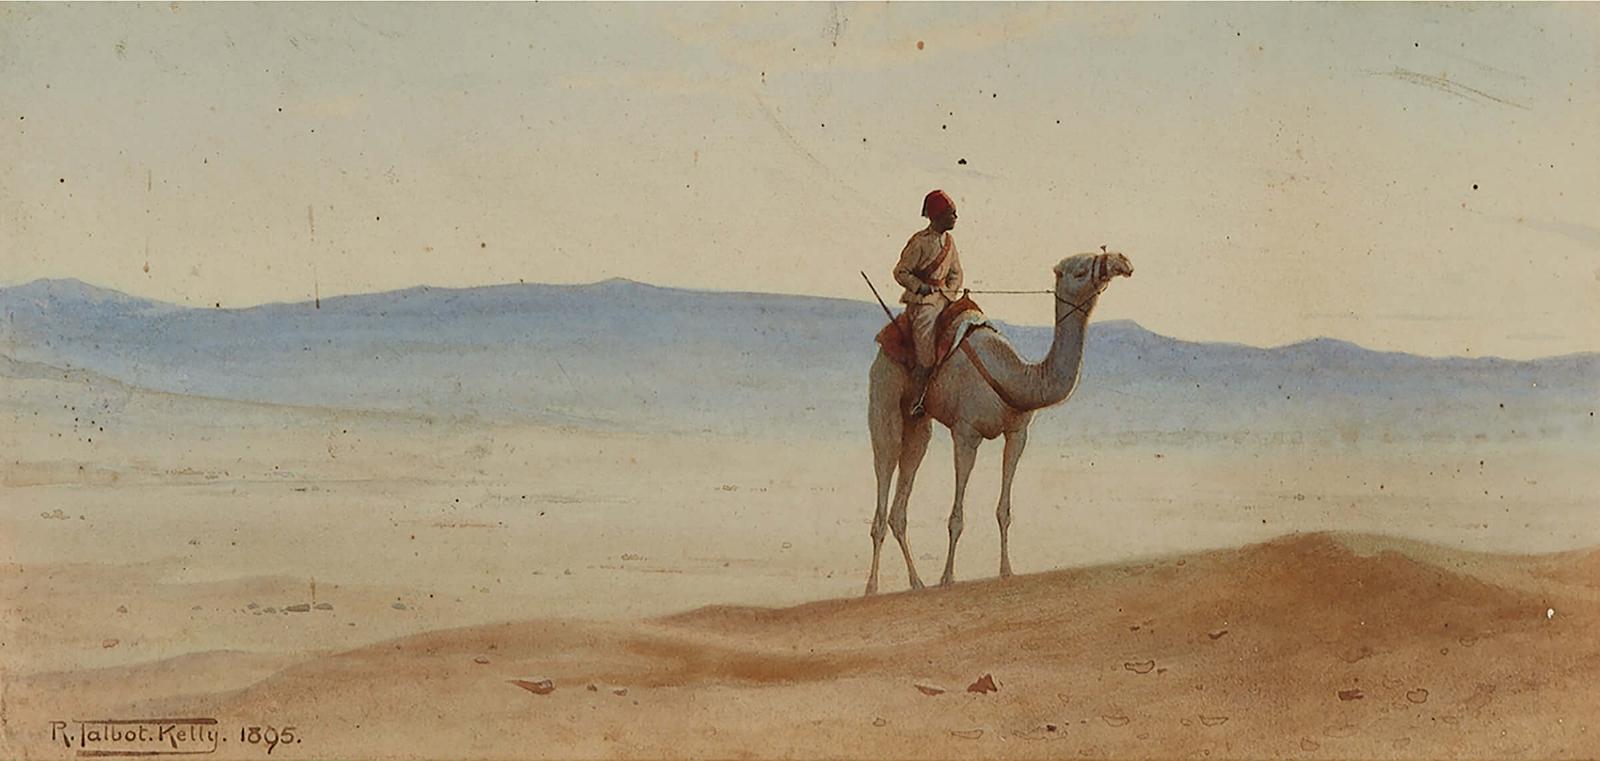 Robert George Talbot Kelly (1956-1934) - Bedouin Scout In The Desert, 1895